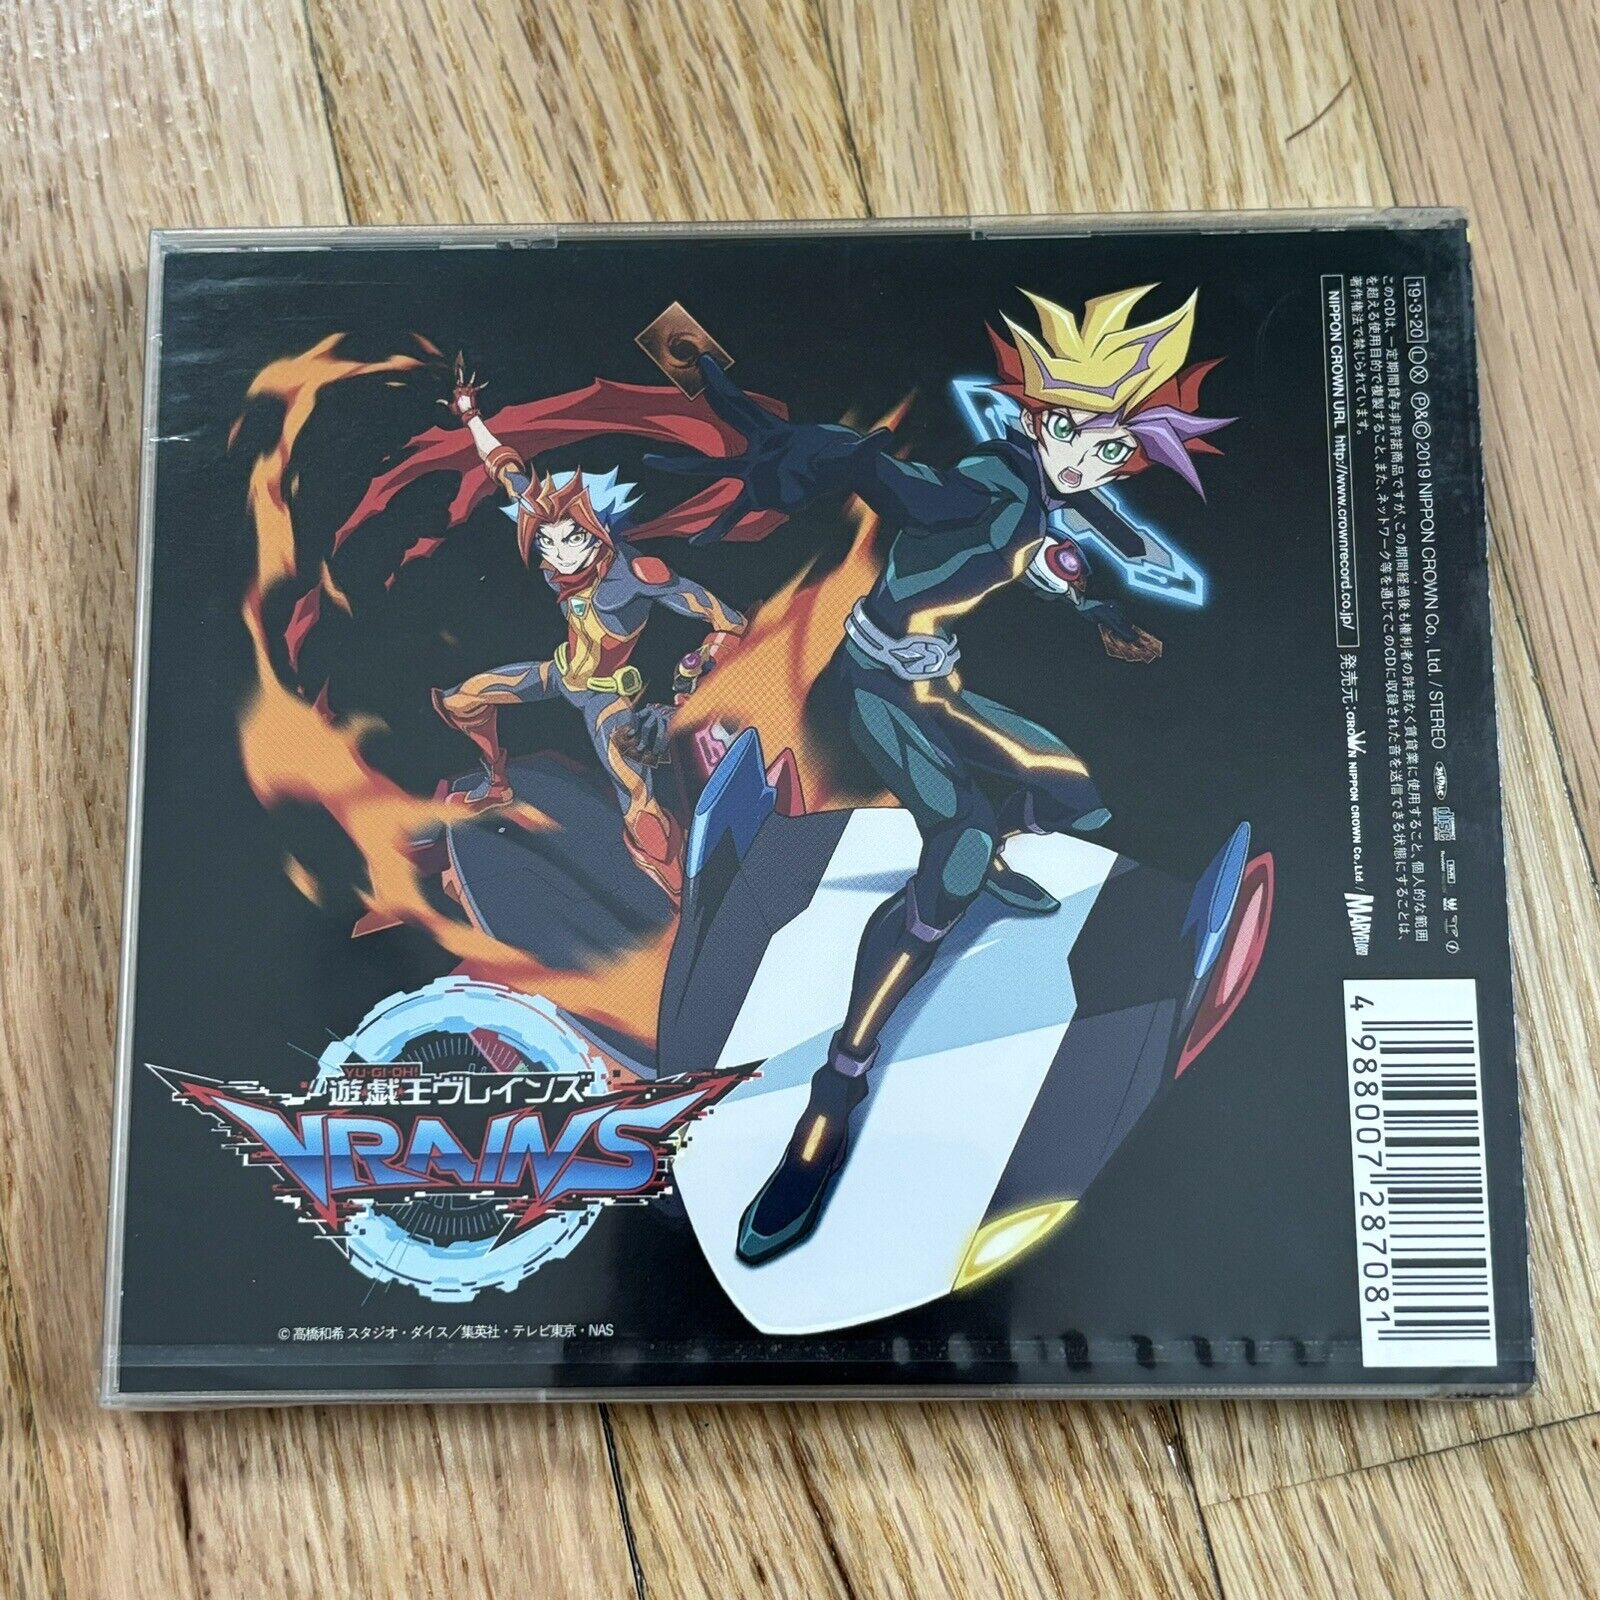 Are You Ready - Regular Edition Bis Yu-Gi-Oh Vrains Ending Song Japan CD OST